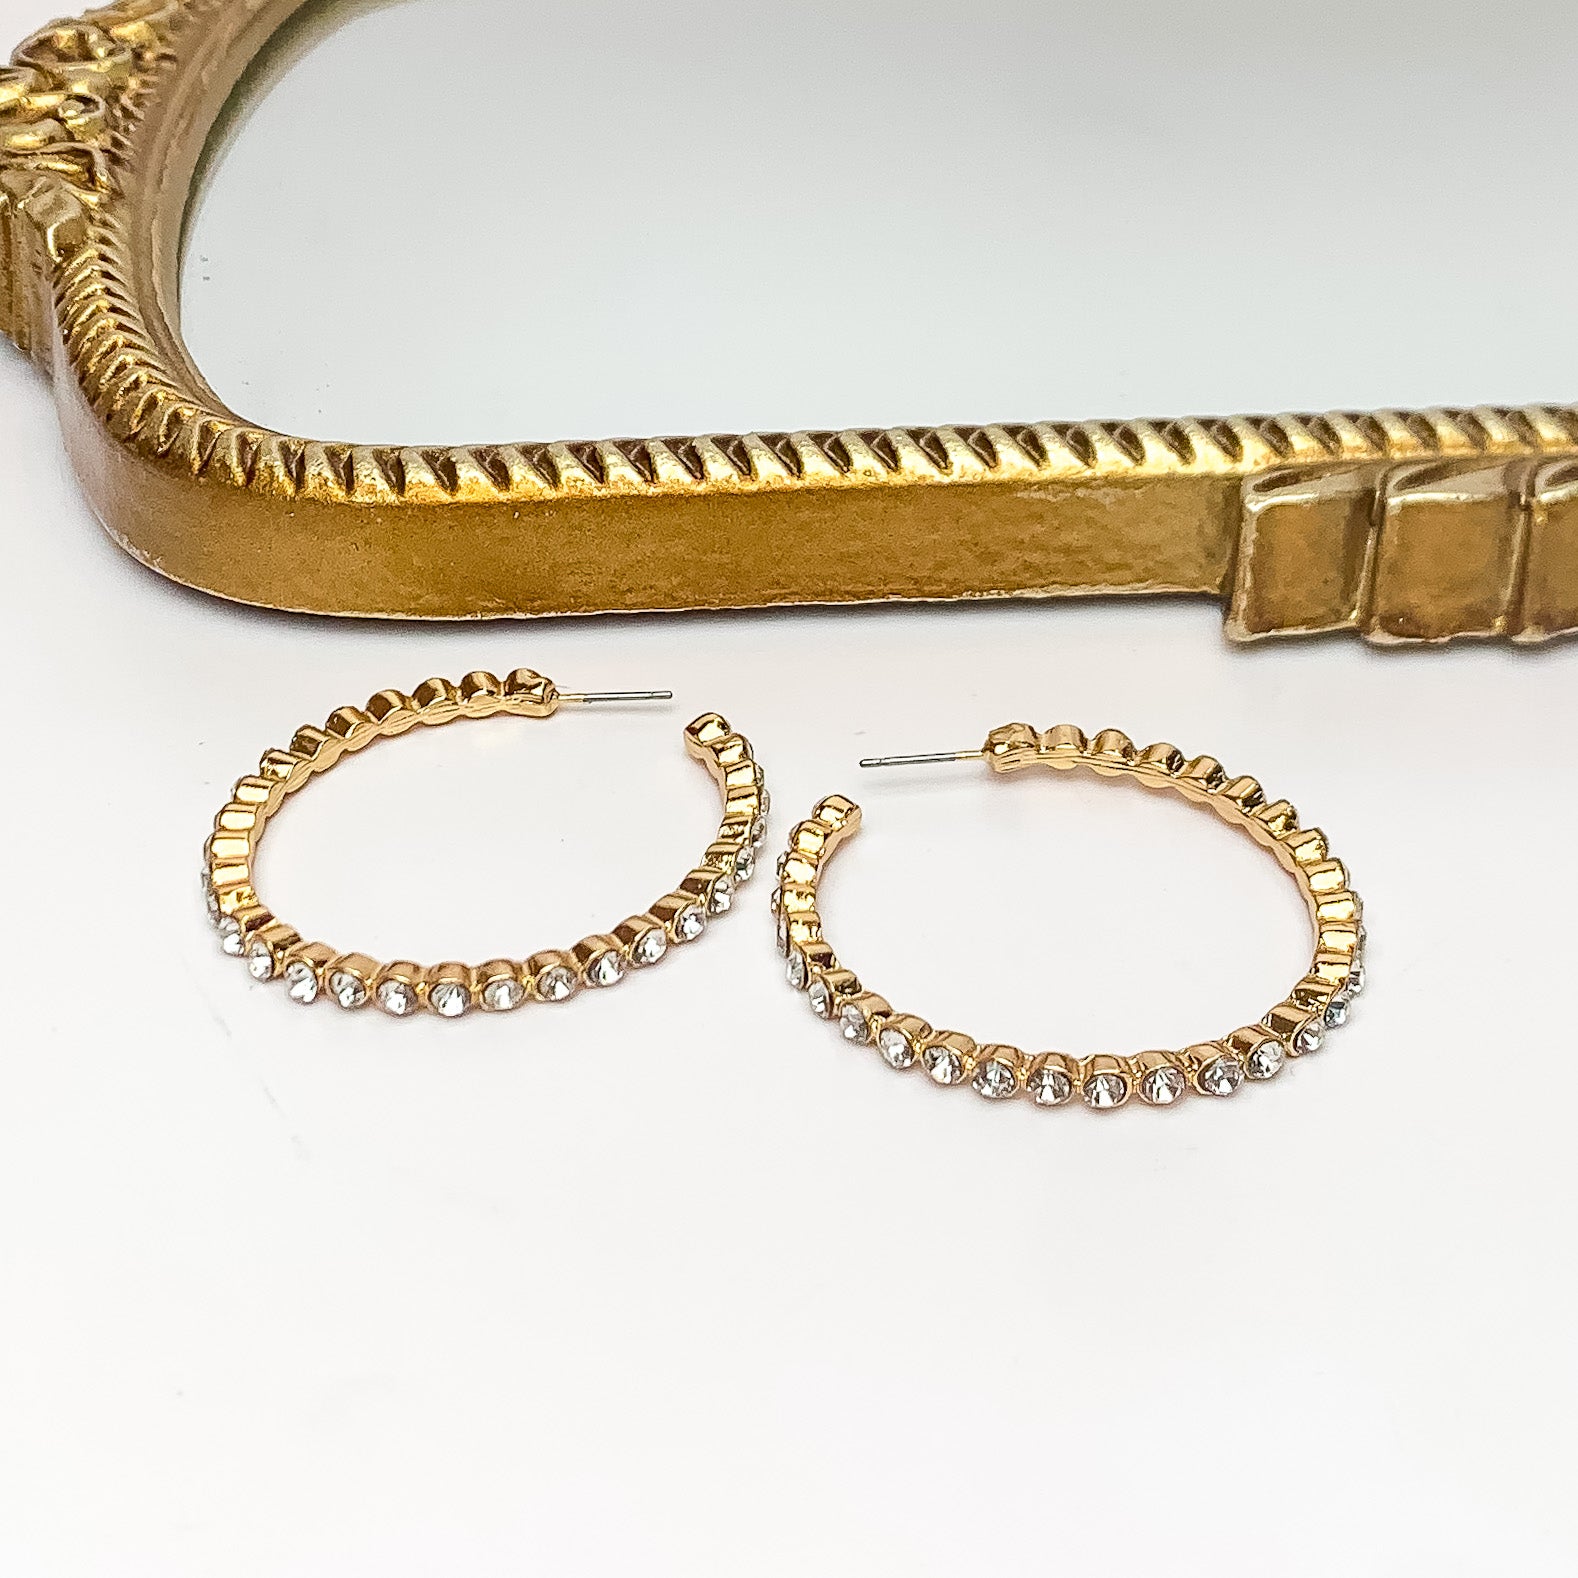 Large Gold Tone Hoop Earrings Outlined in Clear Crystals. Pictured on a white background with a gold frame above the earrings.